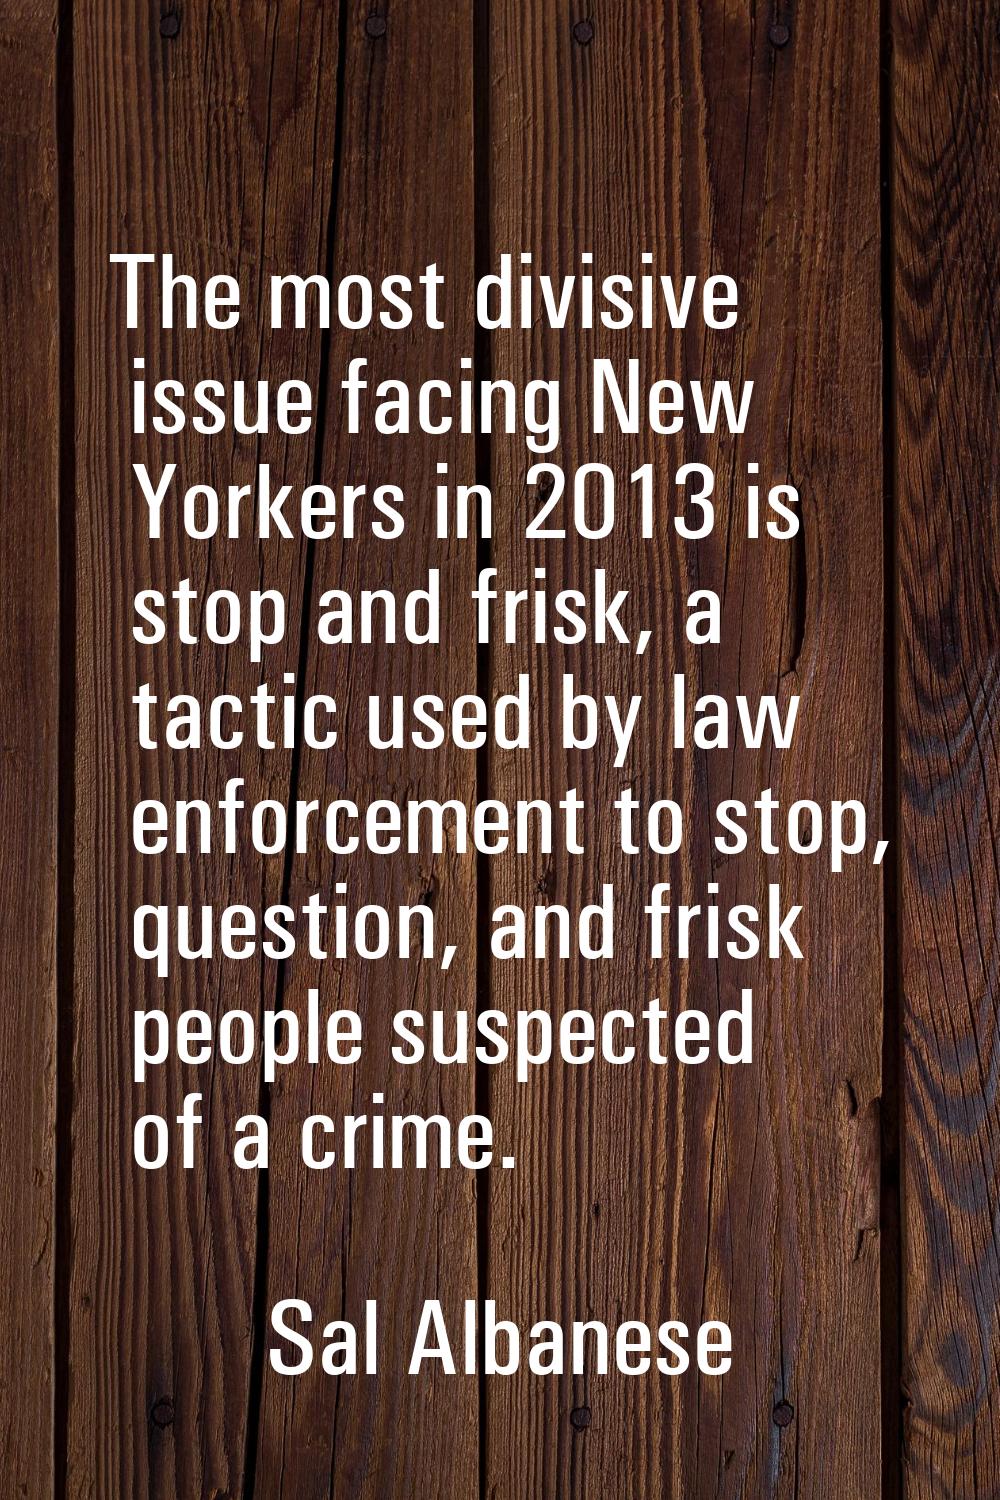 The most divisive issue facing New Yorkers in 2013 is stop and frisk, a tactic used by law enforcem